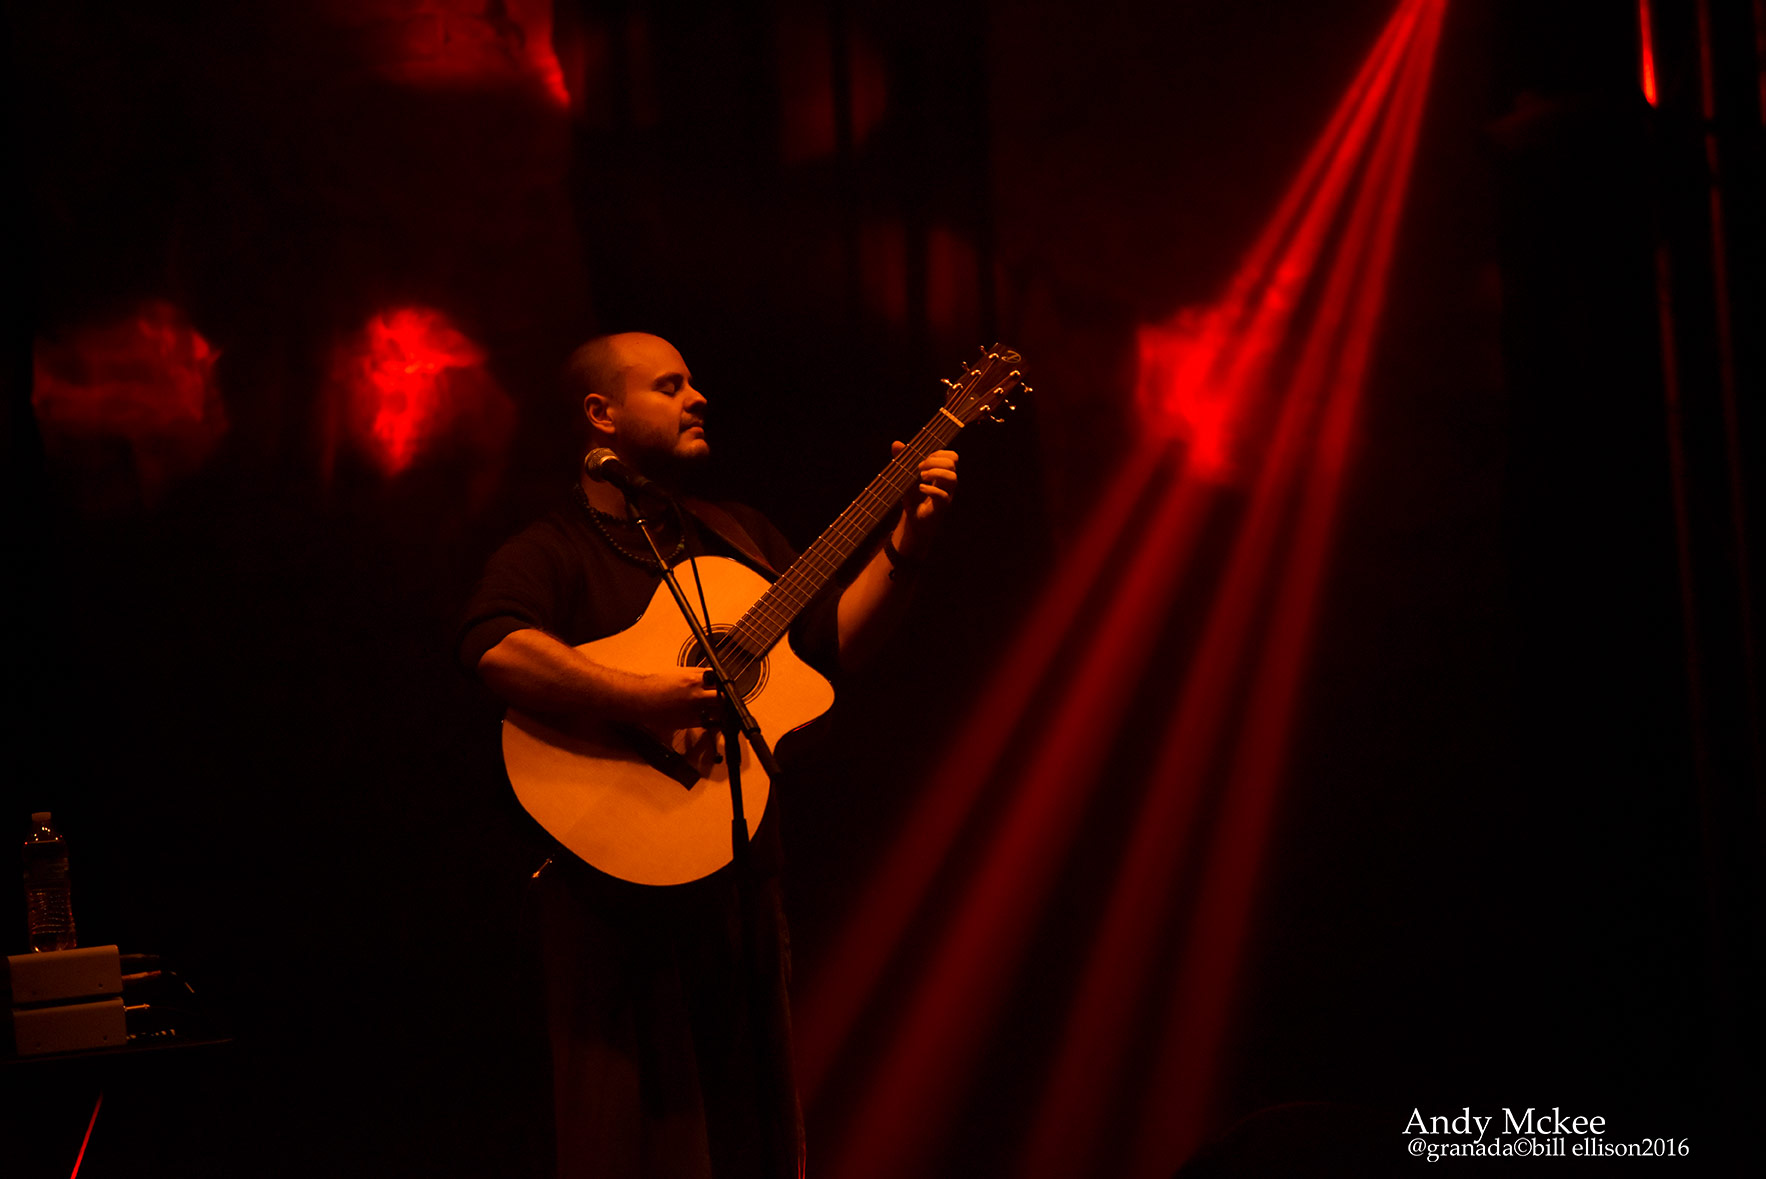 New Tour For Andy McKee